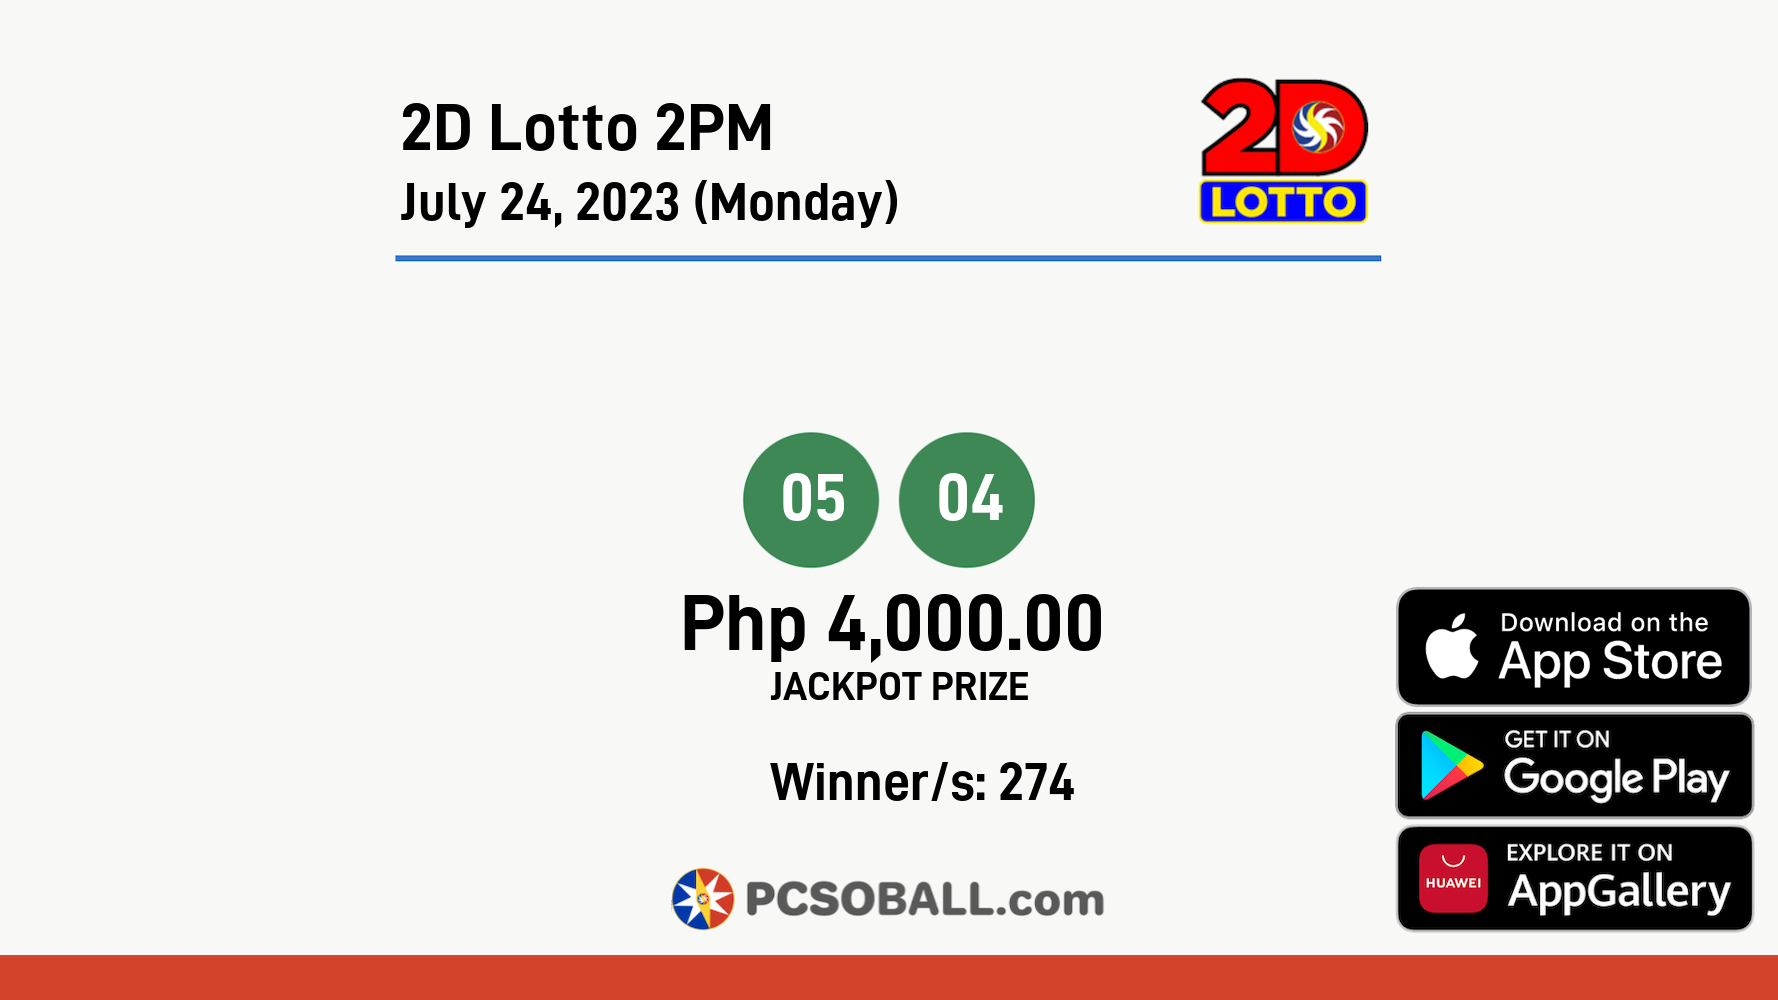 2D Lotto 2PM July 24, 2023 (Monday) Result